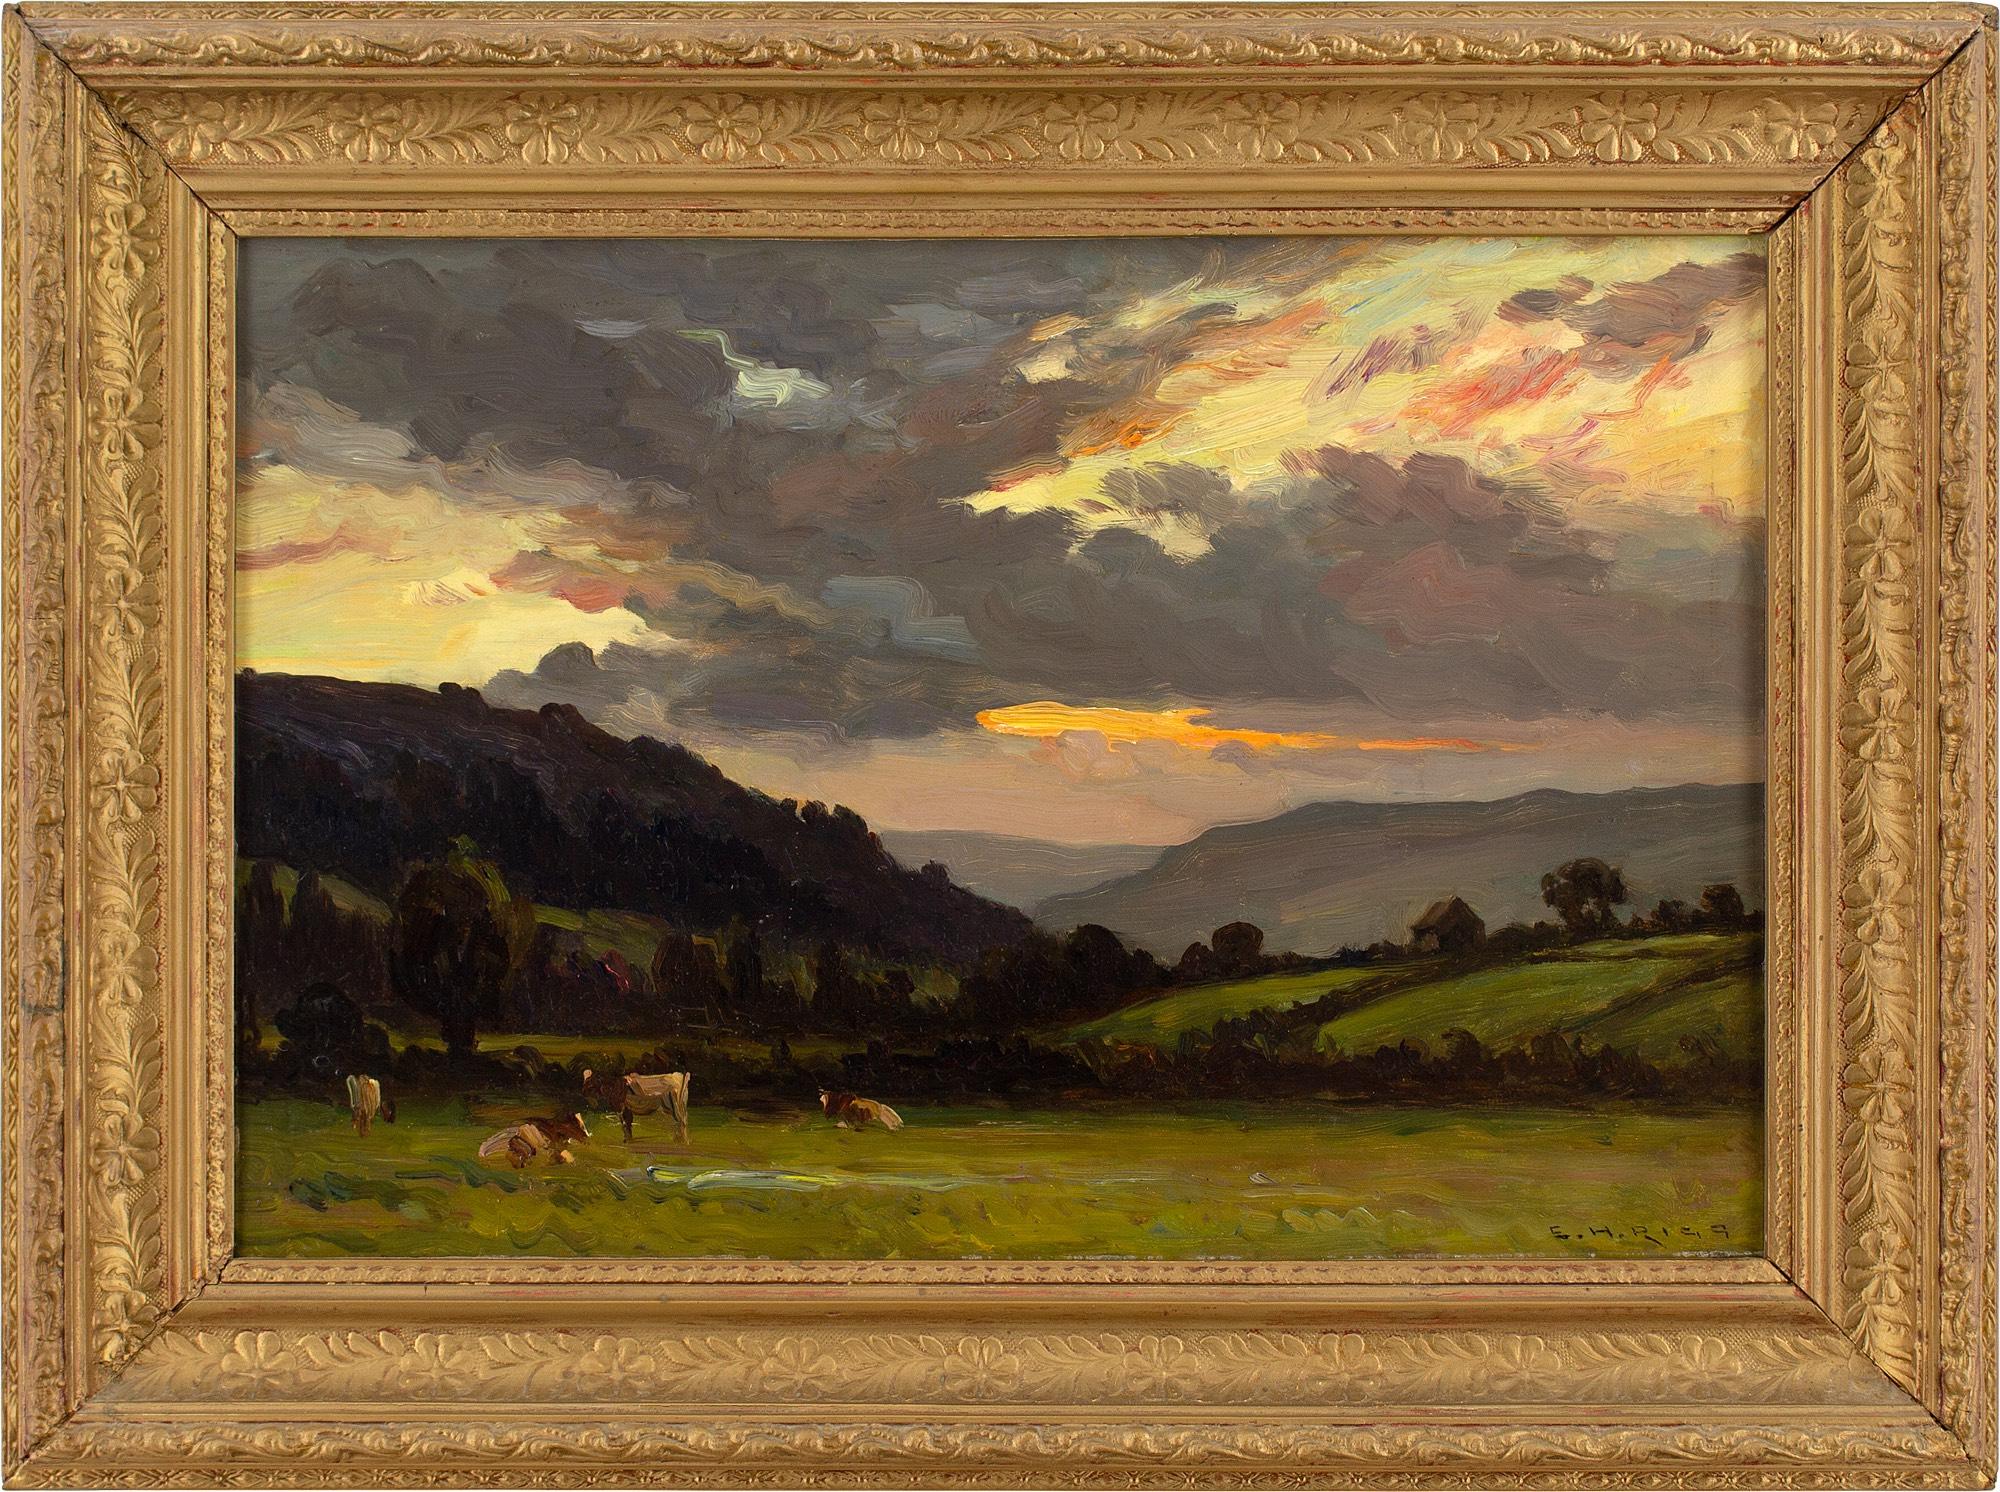 This early 20th-century oil painting by British artist Ernest Higgins Rigg (1868-1947) depicts a view in Swaledale, Yorkshire, with a sunset.

While in Paris training at the Académie Julian, Rigg became influenced by the French Impressionists. He